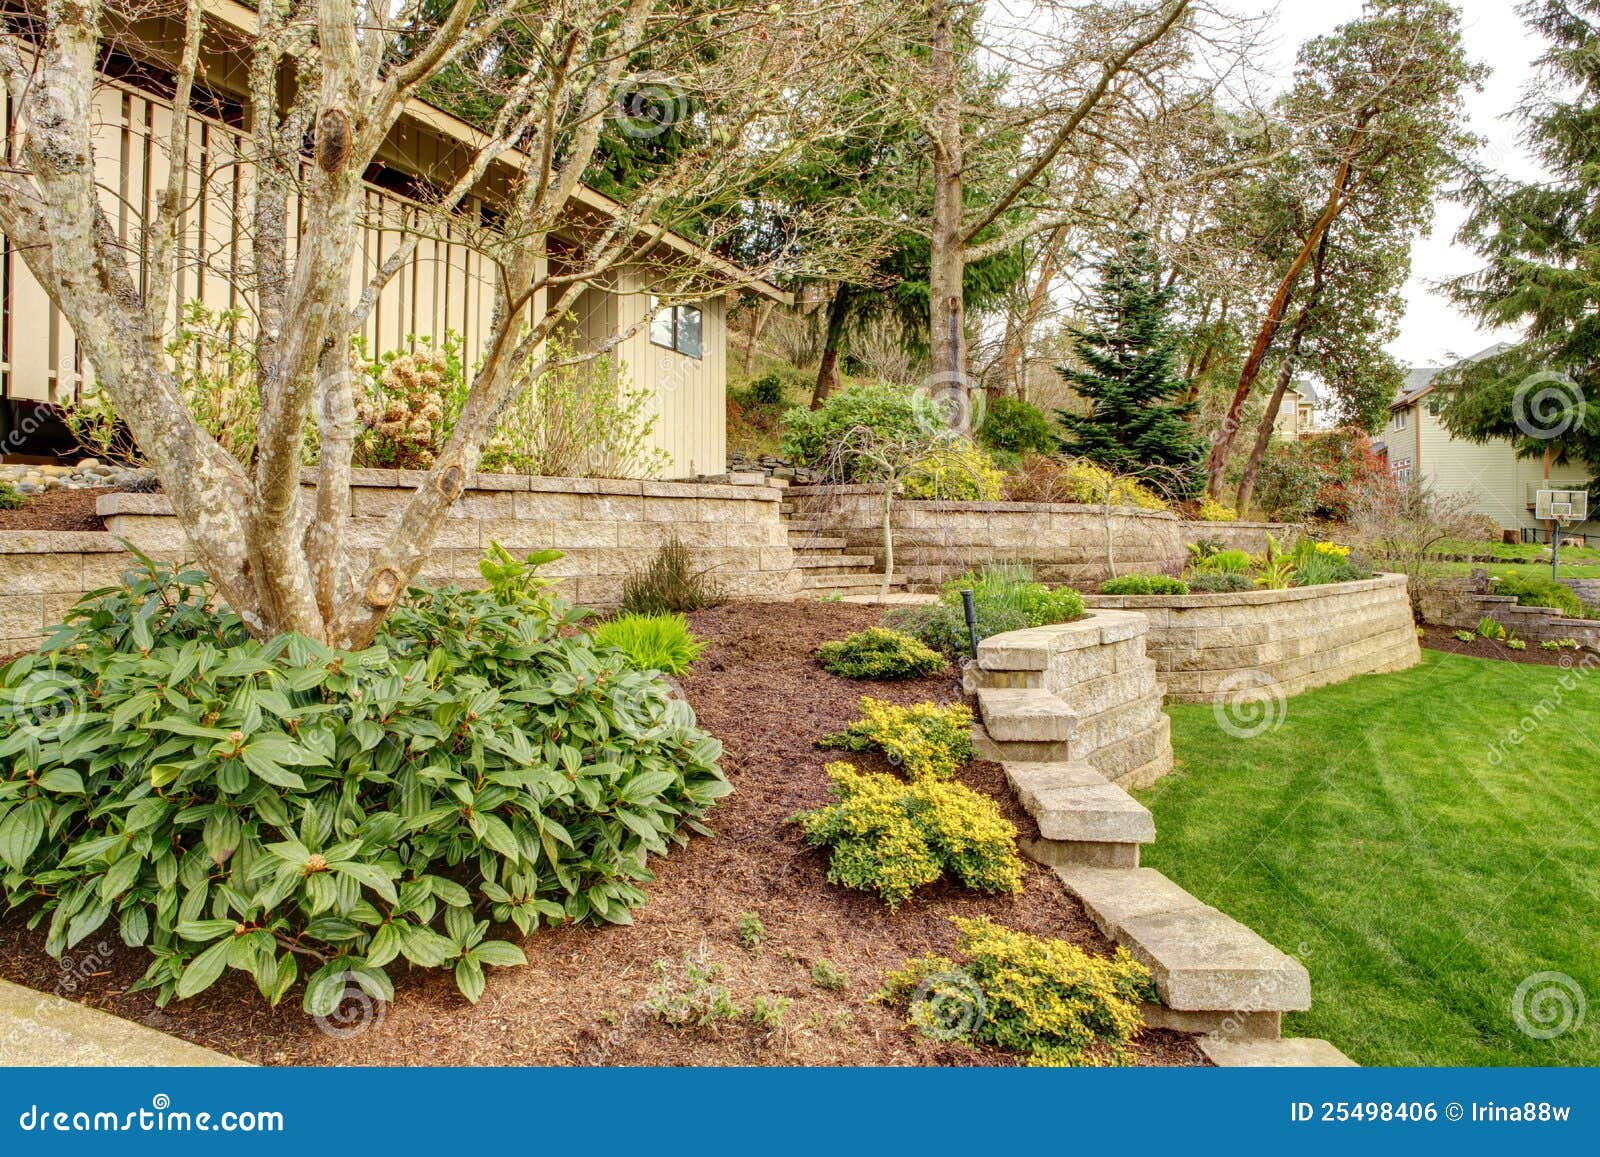 spring landscape with retaining walls and garage.